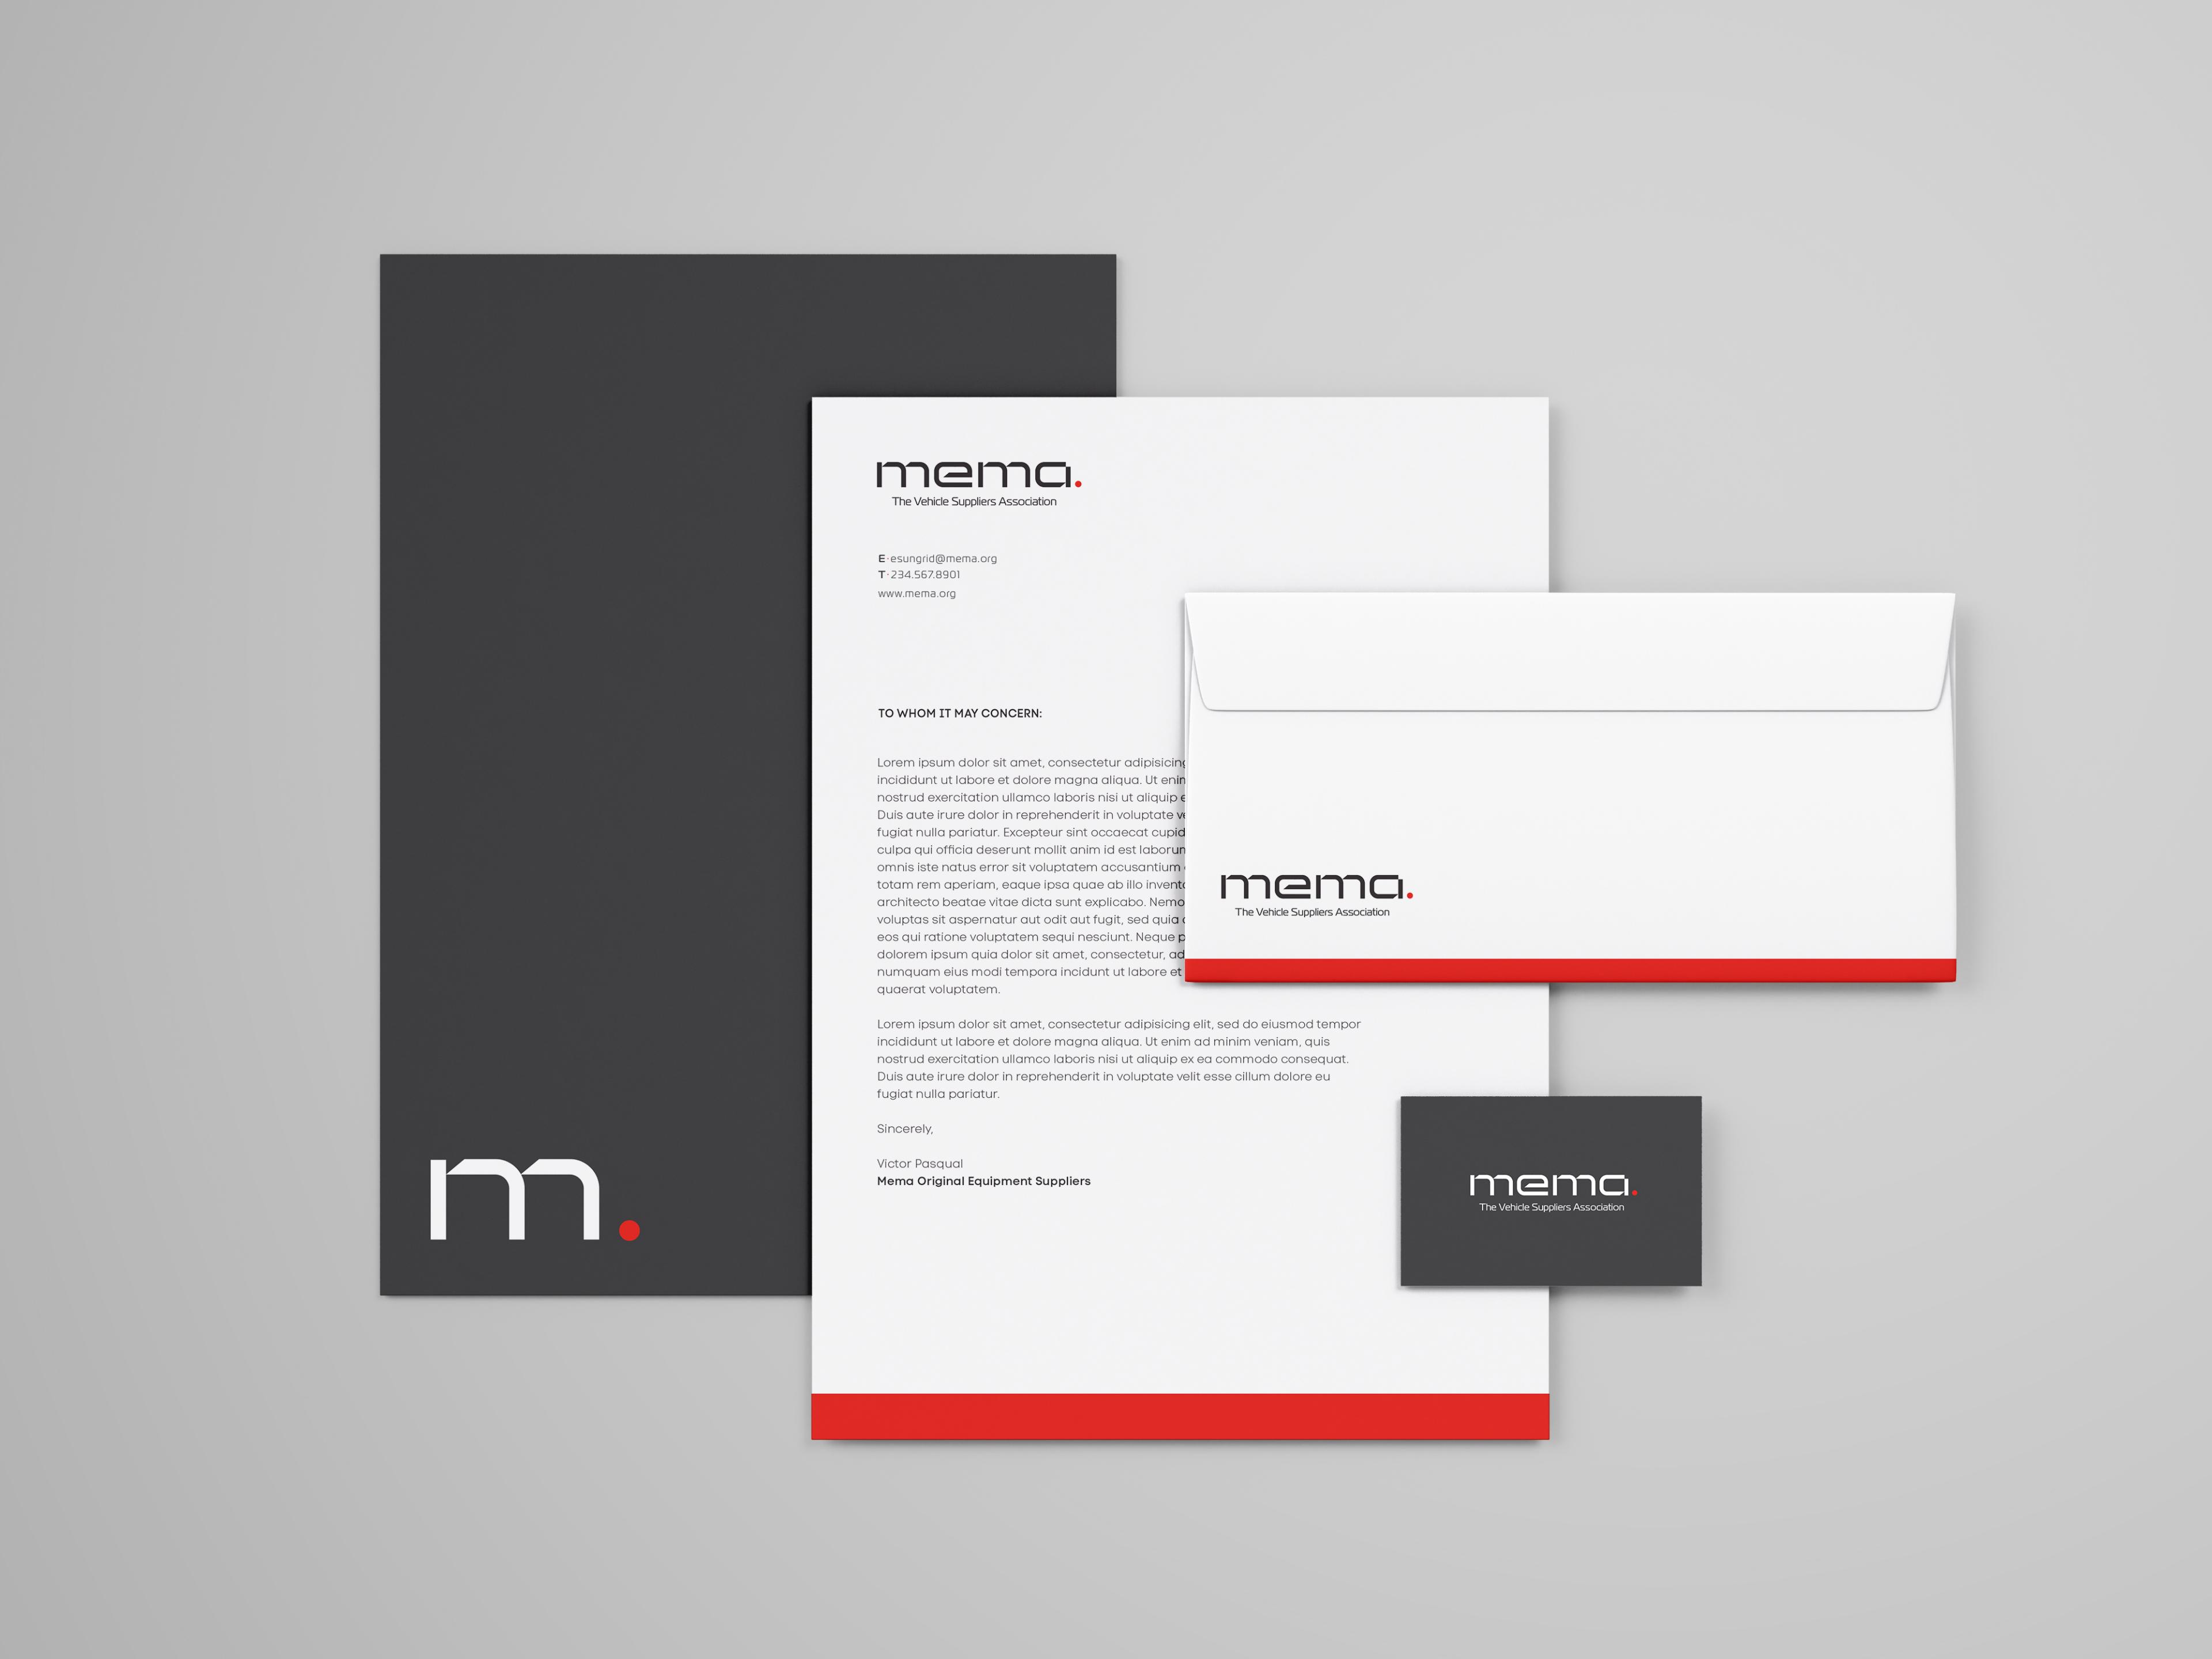 MEMA stationary system - letterhead, envelop and back of the business card.